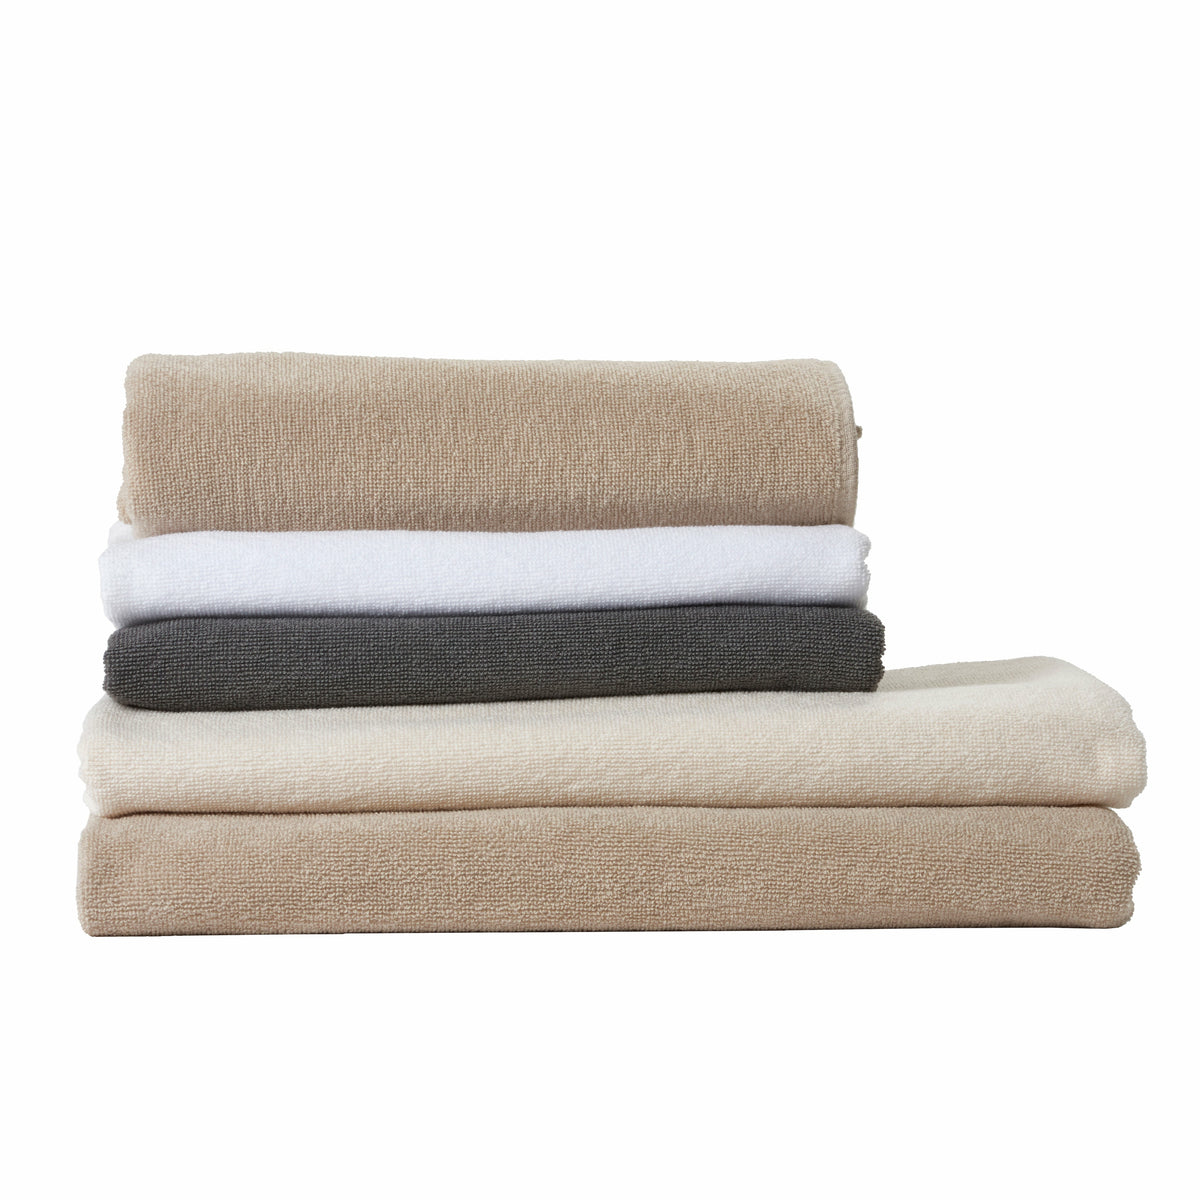 Abyss Spa Bath Towels Stack Folded Fine Linens